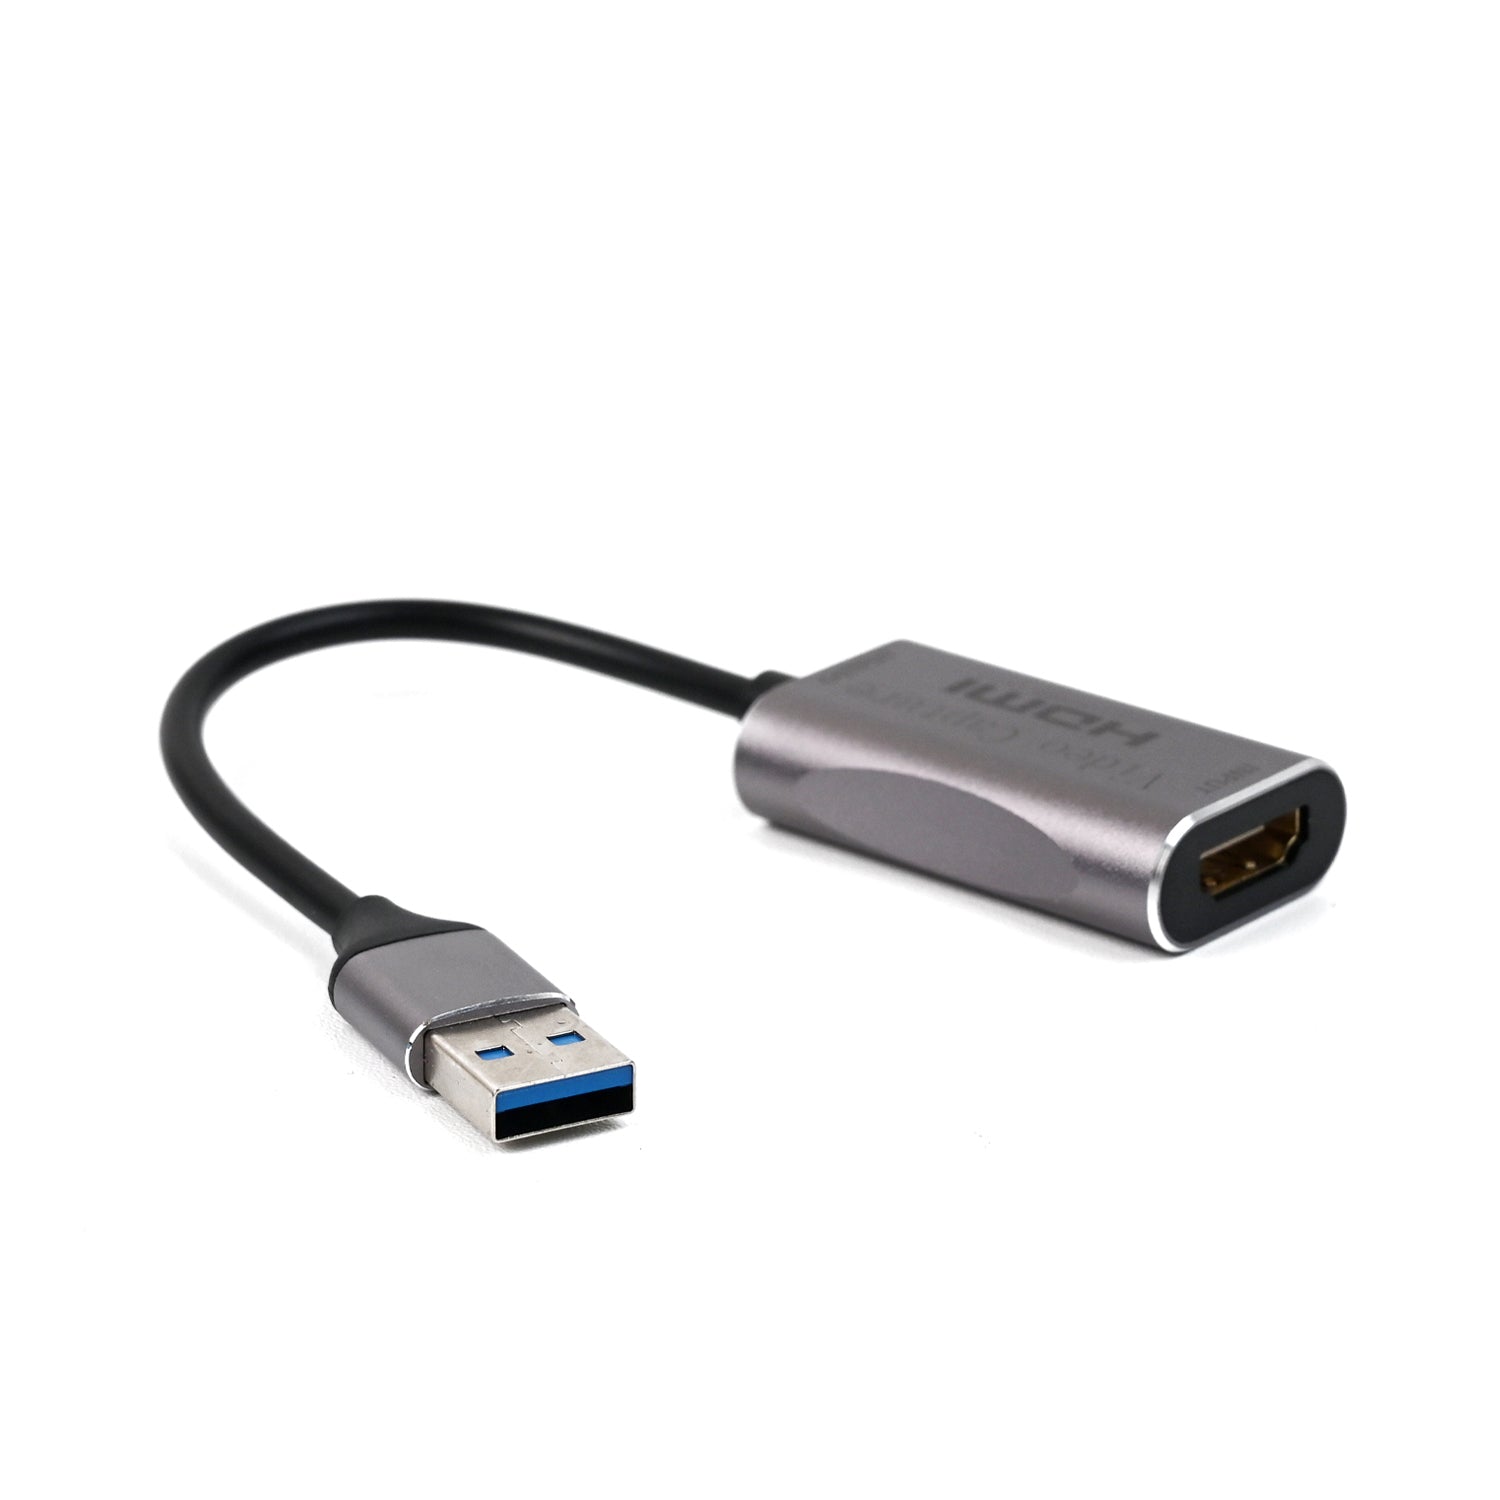 HDMI Video Capture Card USB 3.0 with Cable